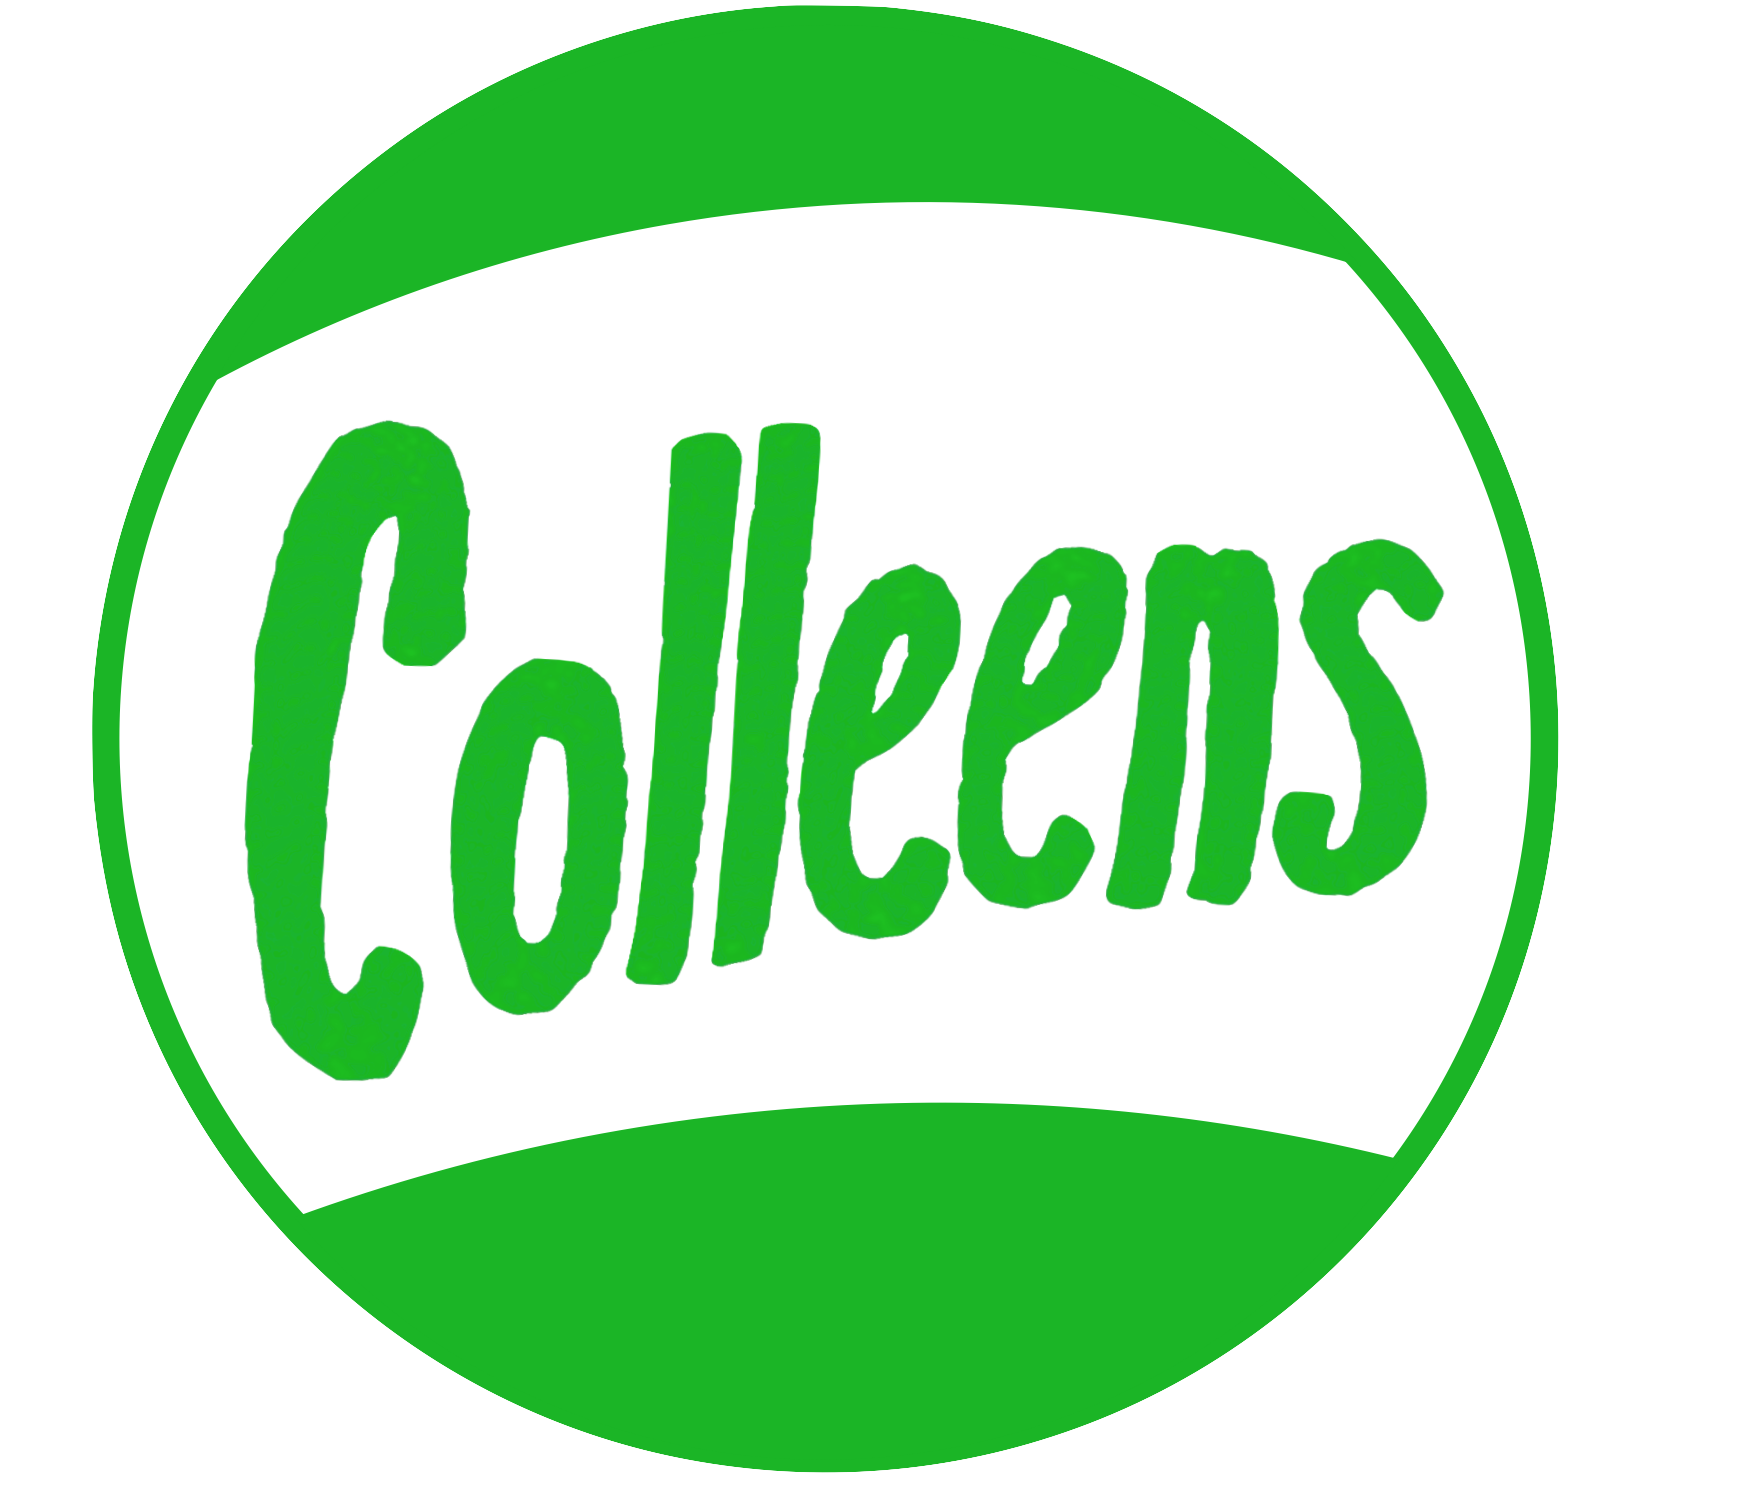 Chicago Colleens